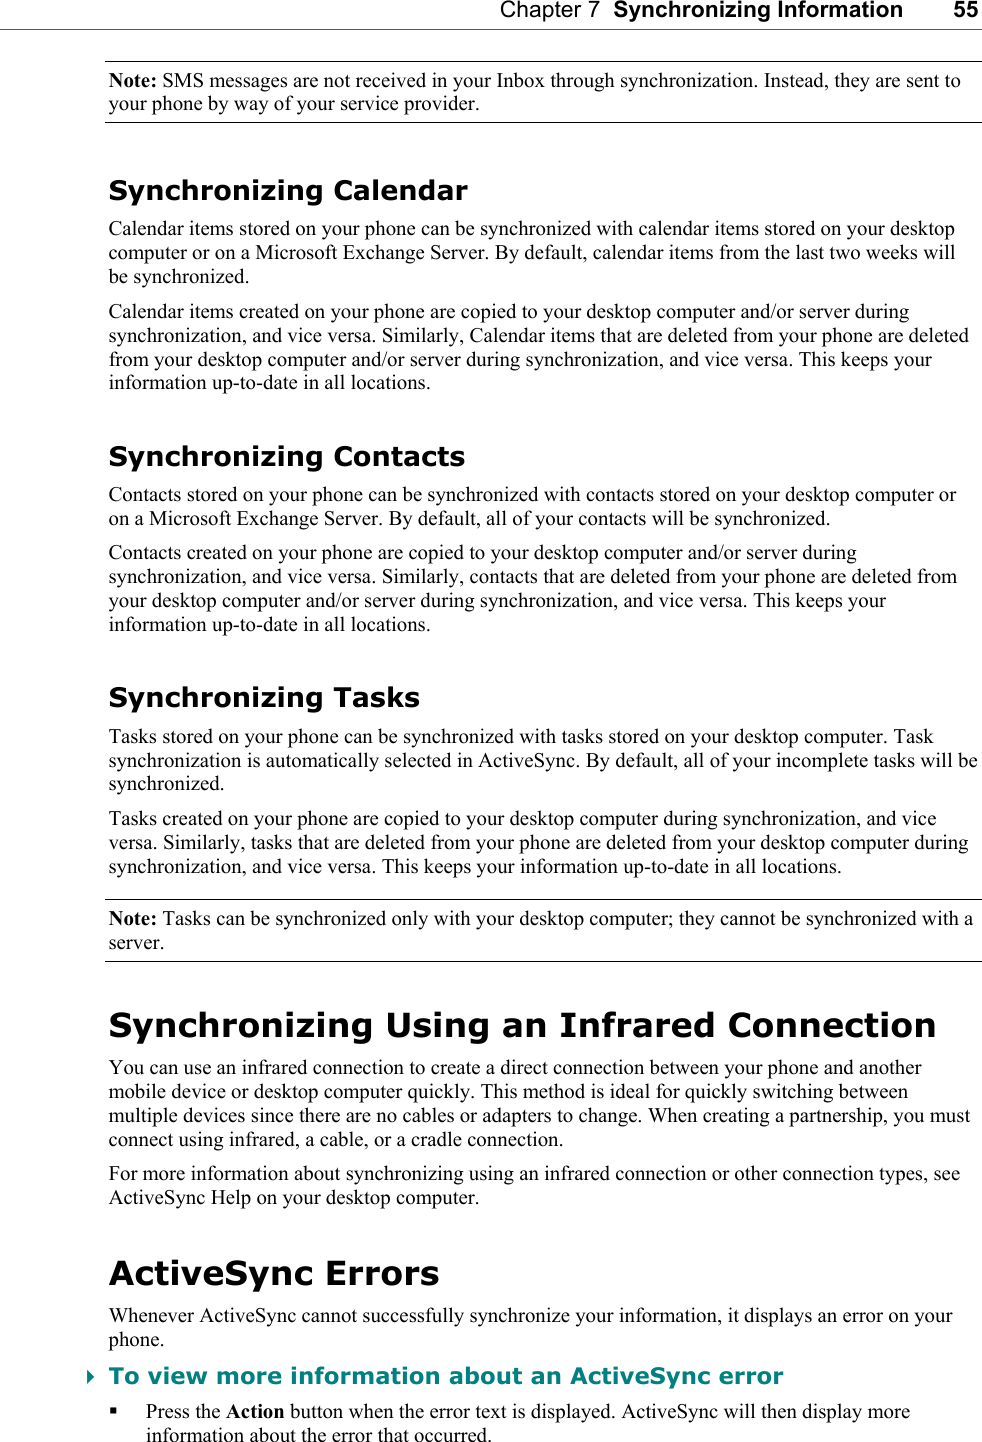    Chapter 7  Synchronizing Information    55 Note: SMS messages are not received in your Inbox through synchronization. Instead, they are sent to your phone by way of your service provider. Synchronizing Calendar Calendar items stored on your phone can be synchronized with calendar items stored on your desktop computer or on a Microsoft Exchange Server. By default, calendar items from the last two weeks will be synchronized. Calendar items created on your phone are copied to your desktop computer and/or server during synchronization, and vice versa. Similarly, Calendar items that are deleted from your phone are deleted from your desktop computer and/or server during synchronization, and vice versa. This keeps your information up-to-date in all locations. Synchronizing Contacts Contacts stored on your phone can be synchronized with contacts stored on your desktop computer or on a Microsoft Exchange Server. By default, all of your contacts will be synchronized. Contacts created on your phone are copied to your desktop computer and/or server during synchronization, and vice versa. Similarly, contacts that are deleted from your phone are deleted from your desktop computer and/or server during synchronization, and vice versa. This keeps your information up-to-date in all locations. Synchronizing Tasks Tasks stored on your phone can be synchronized with tasks stored on your desktop computer. Task synchronization is automatically selected in ActiveSync. By default, all of your incomplete tasks will be synchronized. Tasks created on your phone are copied to your desktop computer during synchronization, and vice versa. Similarly, tasks that are deleted from your phone are deleted from your desktop computer during synchronization, and vice versa. This keeps your information up-to-date in all locations. Note: Tasks can be synchronized only with your desktop computer; they cannot be synchronized with a server. Synchronizing Using an Infrared Connection You can use an infrared connection to create a direct connection between your phone and another mobile device or desktop computer quickly. This method is ideal for quickly switching between multiple devices since there are no cables or adapters to change. When creating a partnership, you must connect using infrared, a cable, or a cradle connection. For more information about synchronizing using an infrared connection or other connection types, see ActiveSync Help on your desktop computer. ActiveSync Errors Whenever ActiveSync cannot successfully synchronize your information, it displays an error on your phone.  To view more information about an ActiveSync error  Press the Action button when the error text is displayed. ActiveSync will then display more information about the error that occurred. 